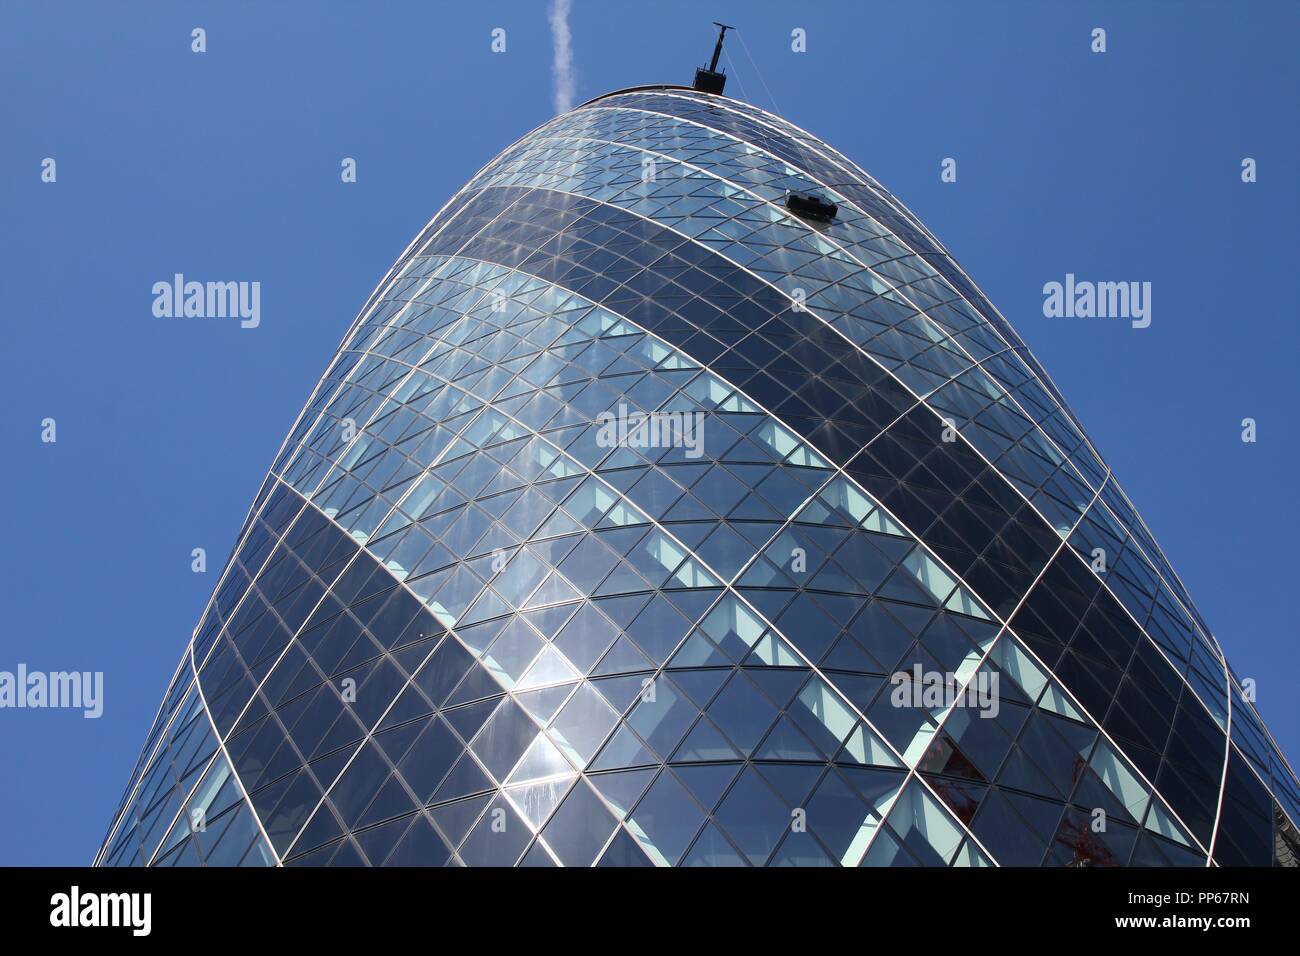 LONDON, UK - MAY 13, 2012: View of 30 St Mary Axe building in London. It was built in 2003 and is among top 10 tallest London buildings (180m tall). Stock Photo